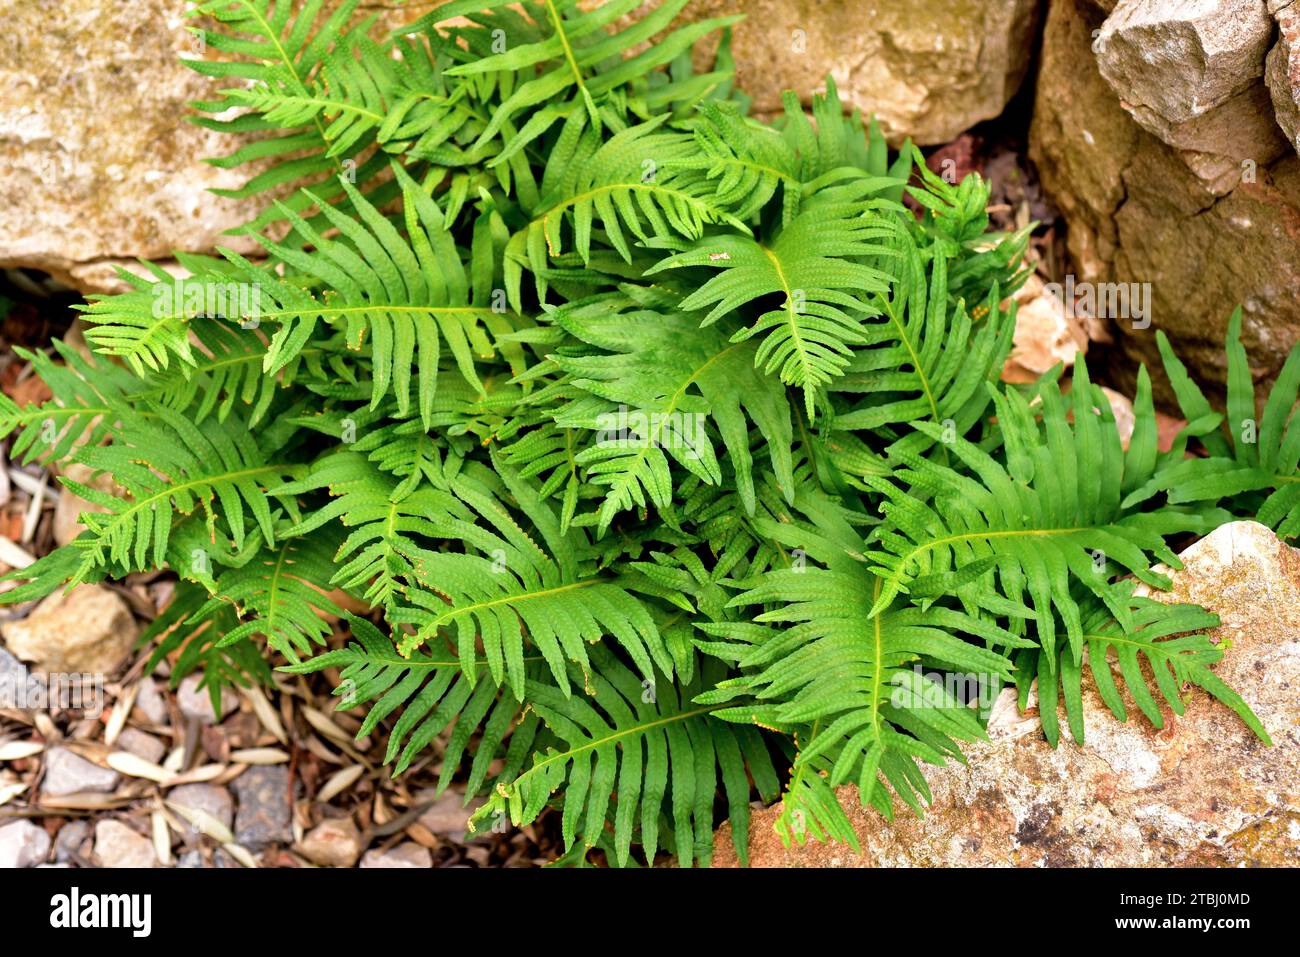 Southern polipody (Polypodium cambricum) is a fern native to southern and western Europe. Stock Photo